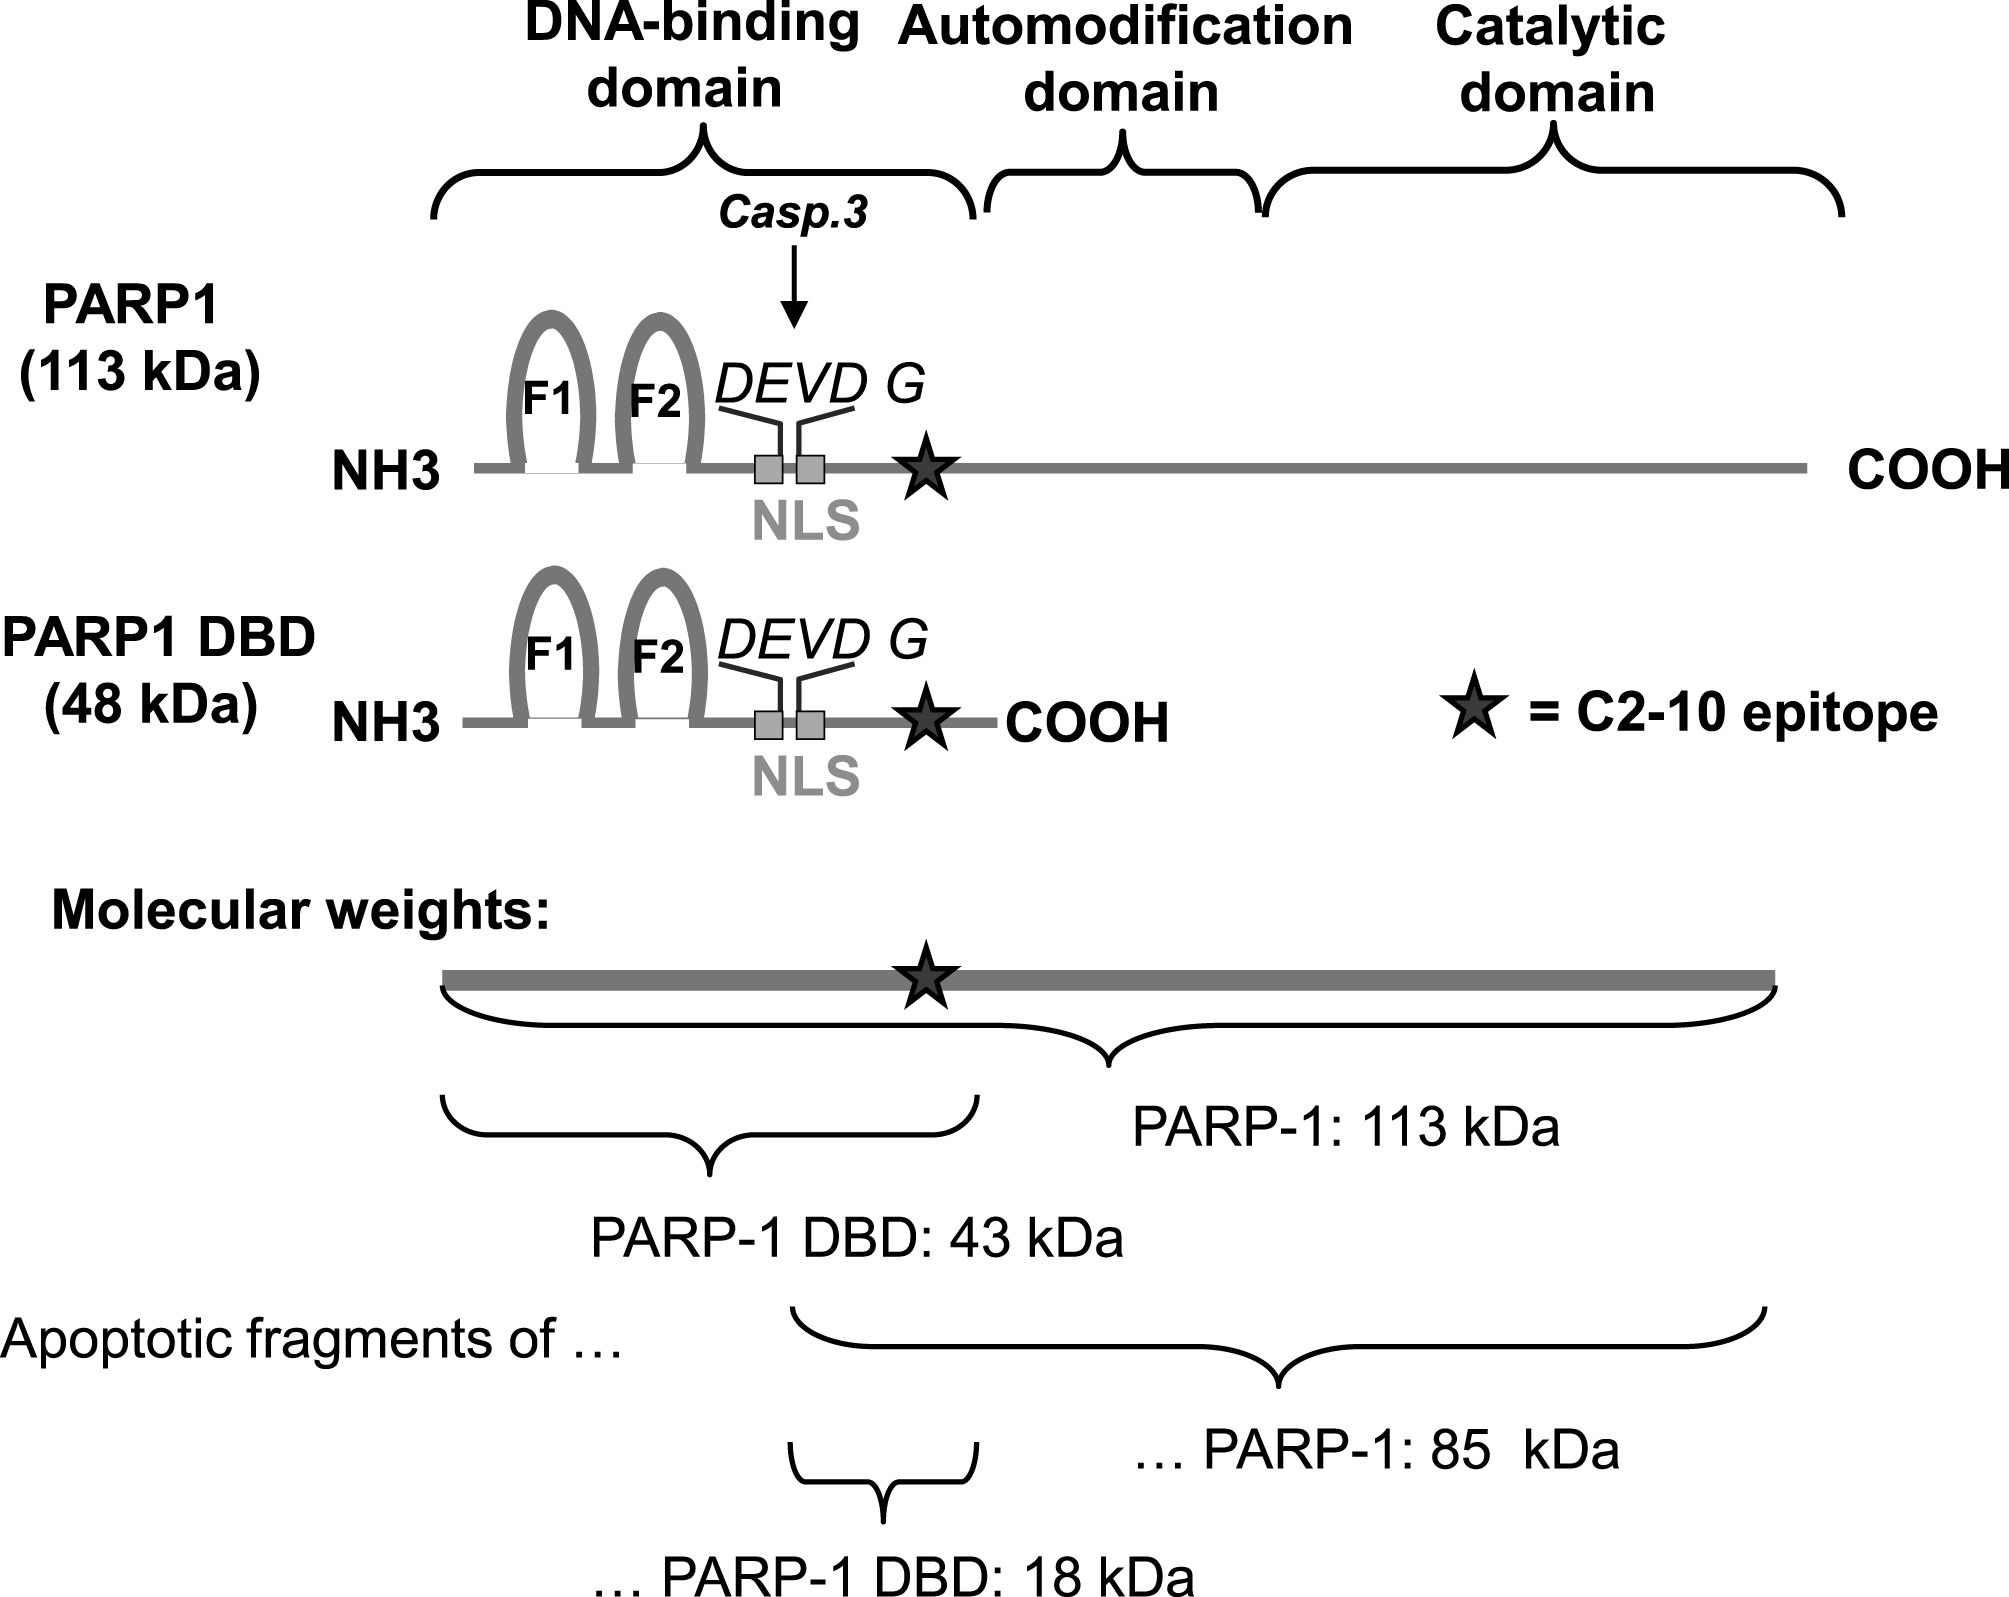 Features and approximate sizes of PARP1, PARP1 DBD and their apoptotic fragments. Caspase-3 cleavage of PARP1 takes place in the DEVD G amino acid sequence in the middle of the bipartite nuclear localization signal (NLS). The recognition site of the PARP1 specific antibody (clone C2-10) is depicted by a star. The molecular size of PARP1 protein is 113 kDa and the PARP1 apoptotic fragment recognized by the C2-10 antibody is ∼85 kDa. PARP1 DBD is 44 kDa in size and the apoptotic fragment of PARP-1 DBD recognized by C2-10 is ∼18 kDa.